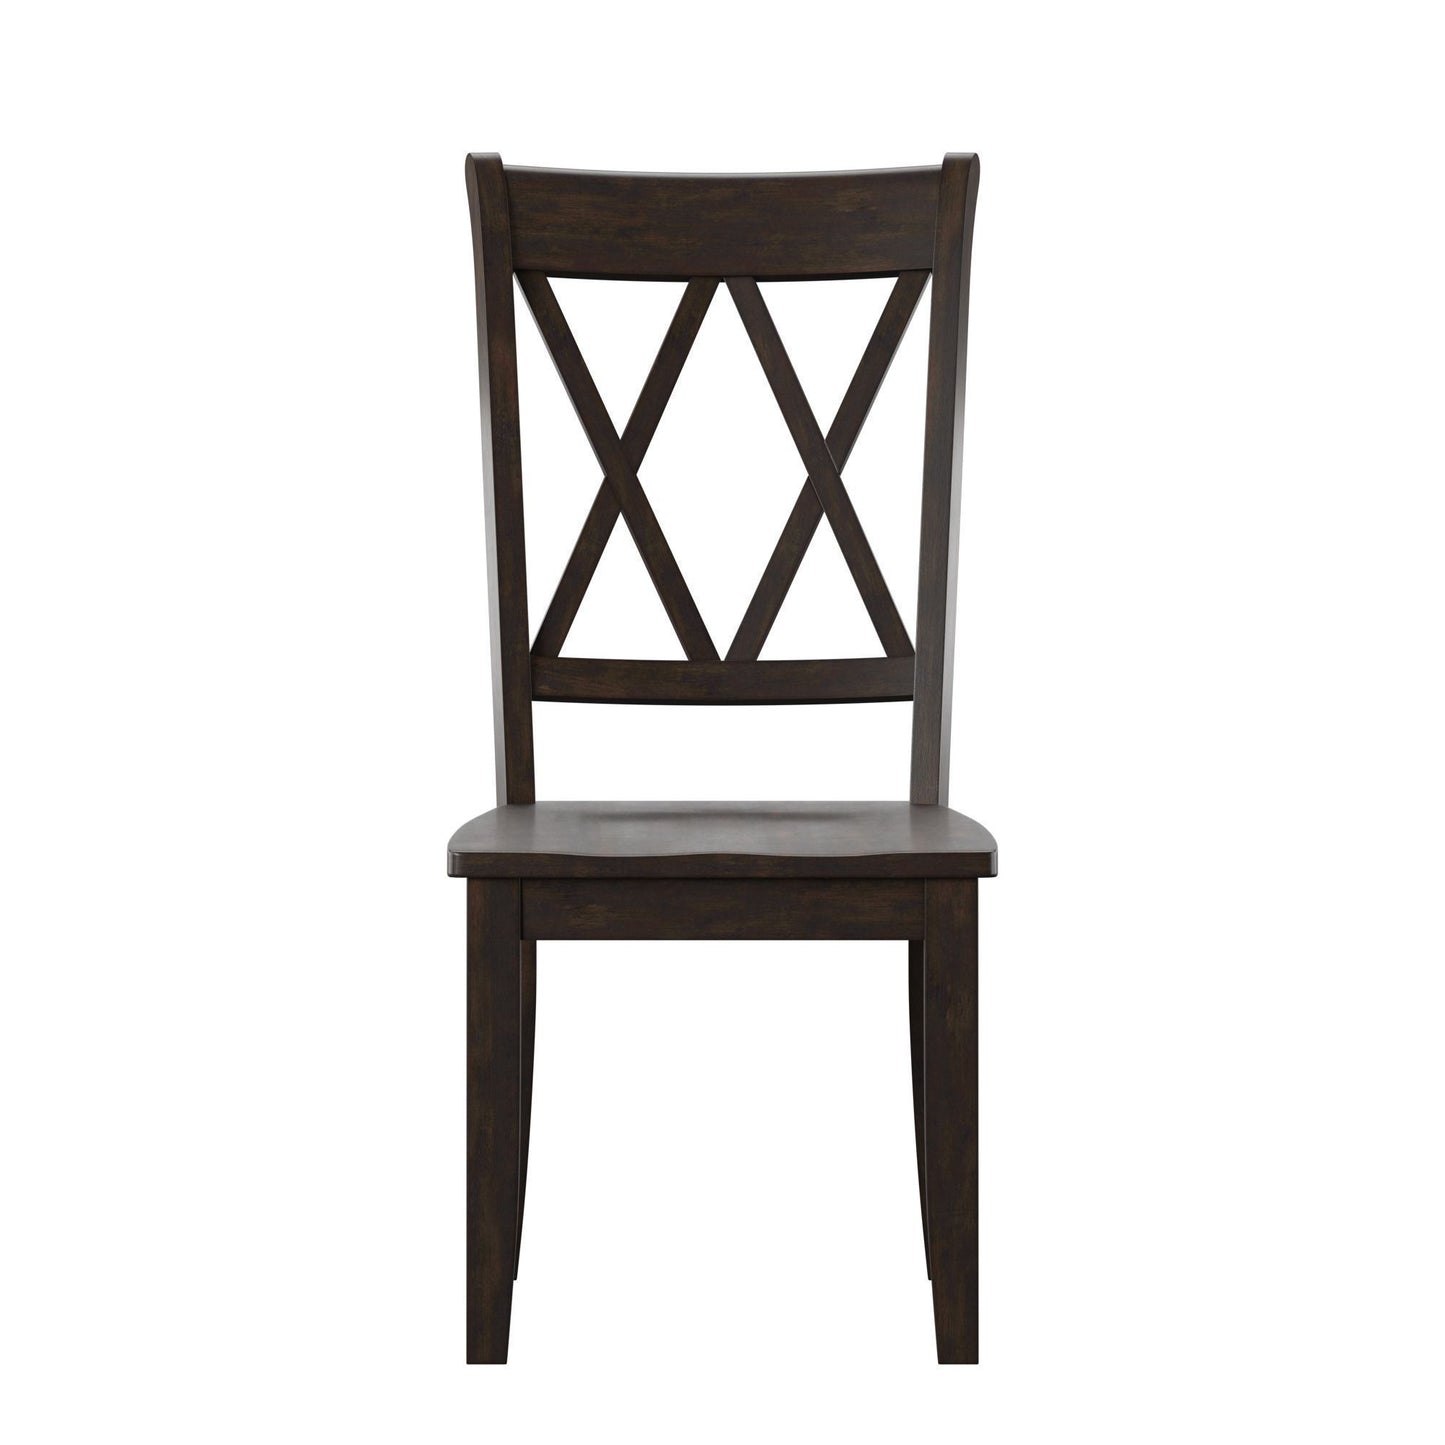 Double X Back Wood Dining Chairs (Set of 2) - Antique Black Finish